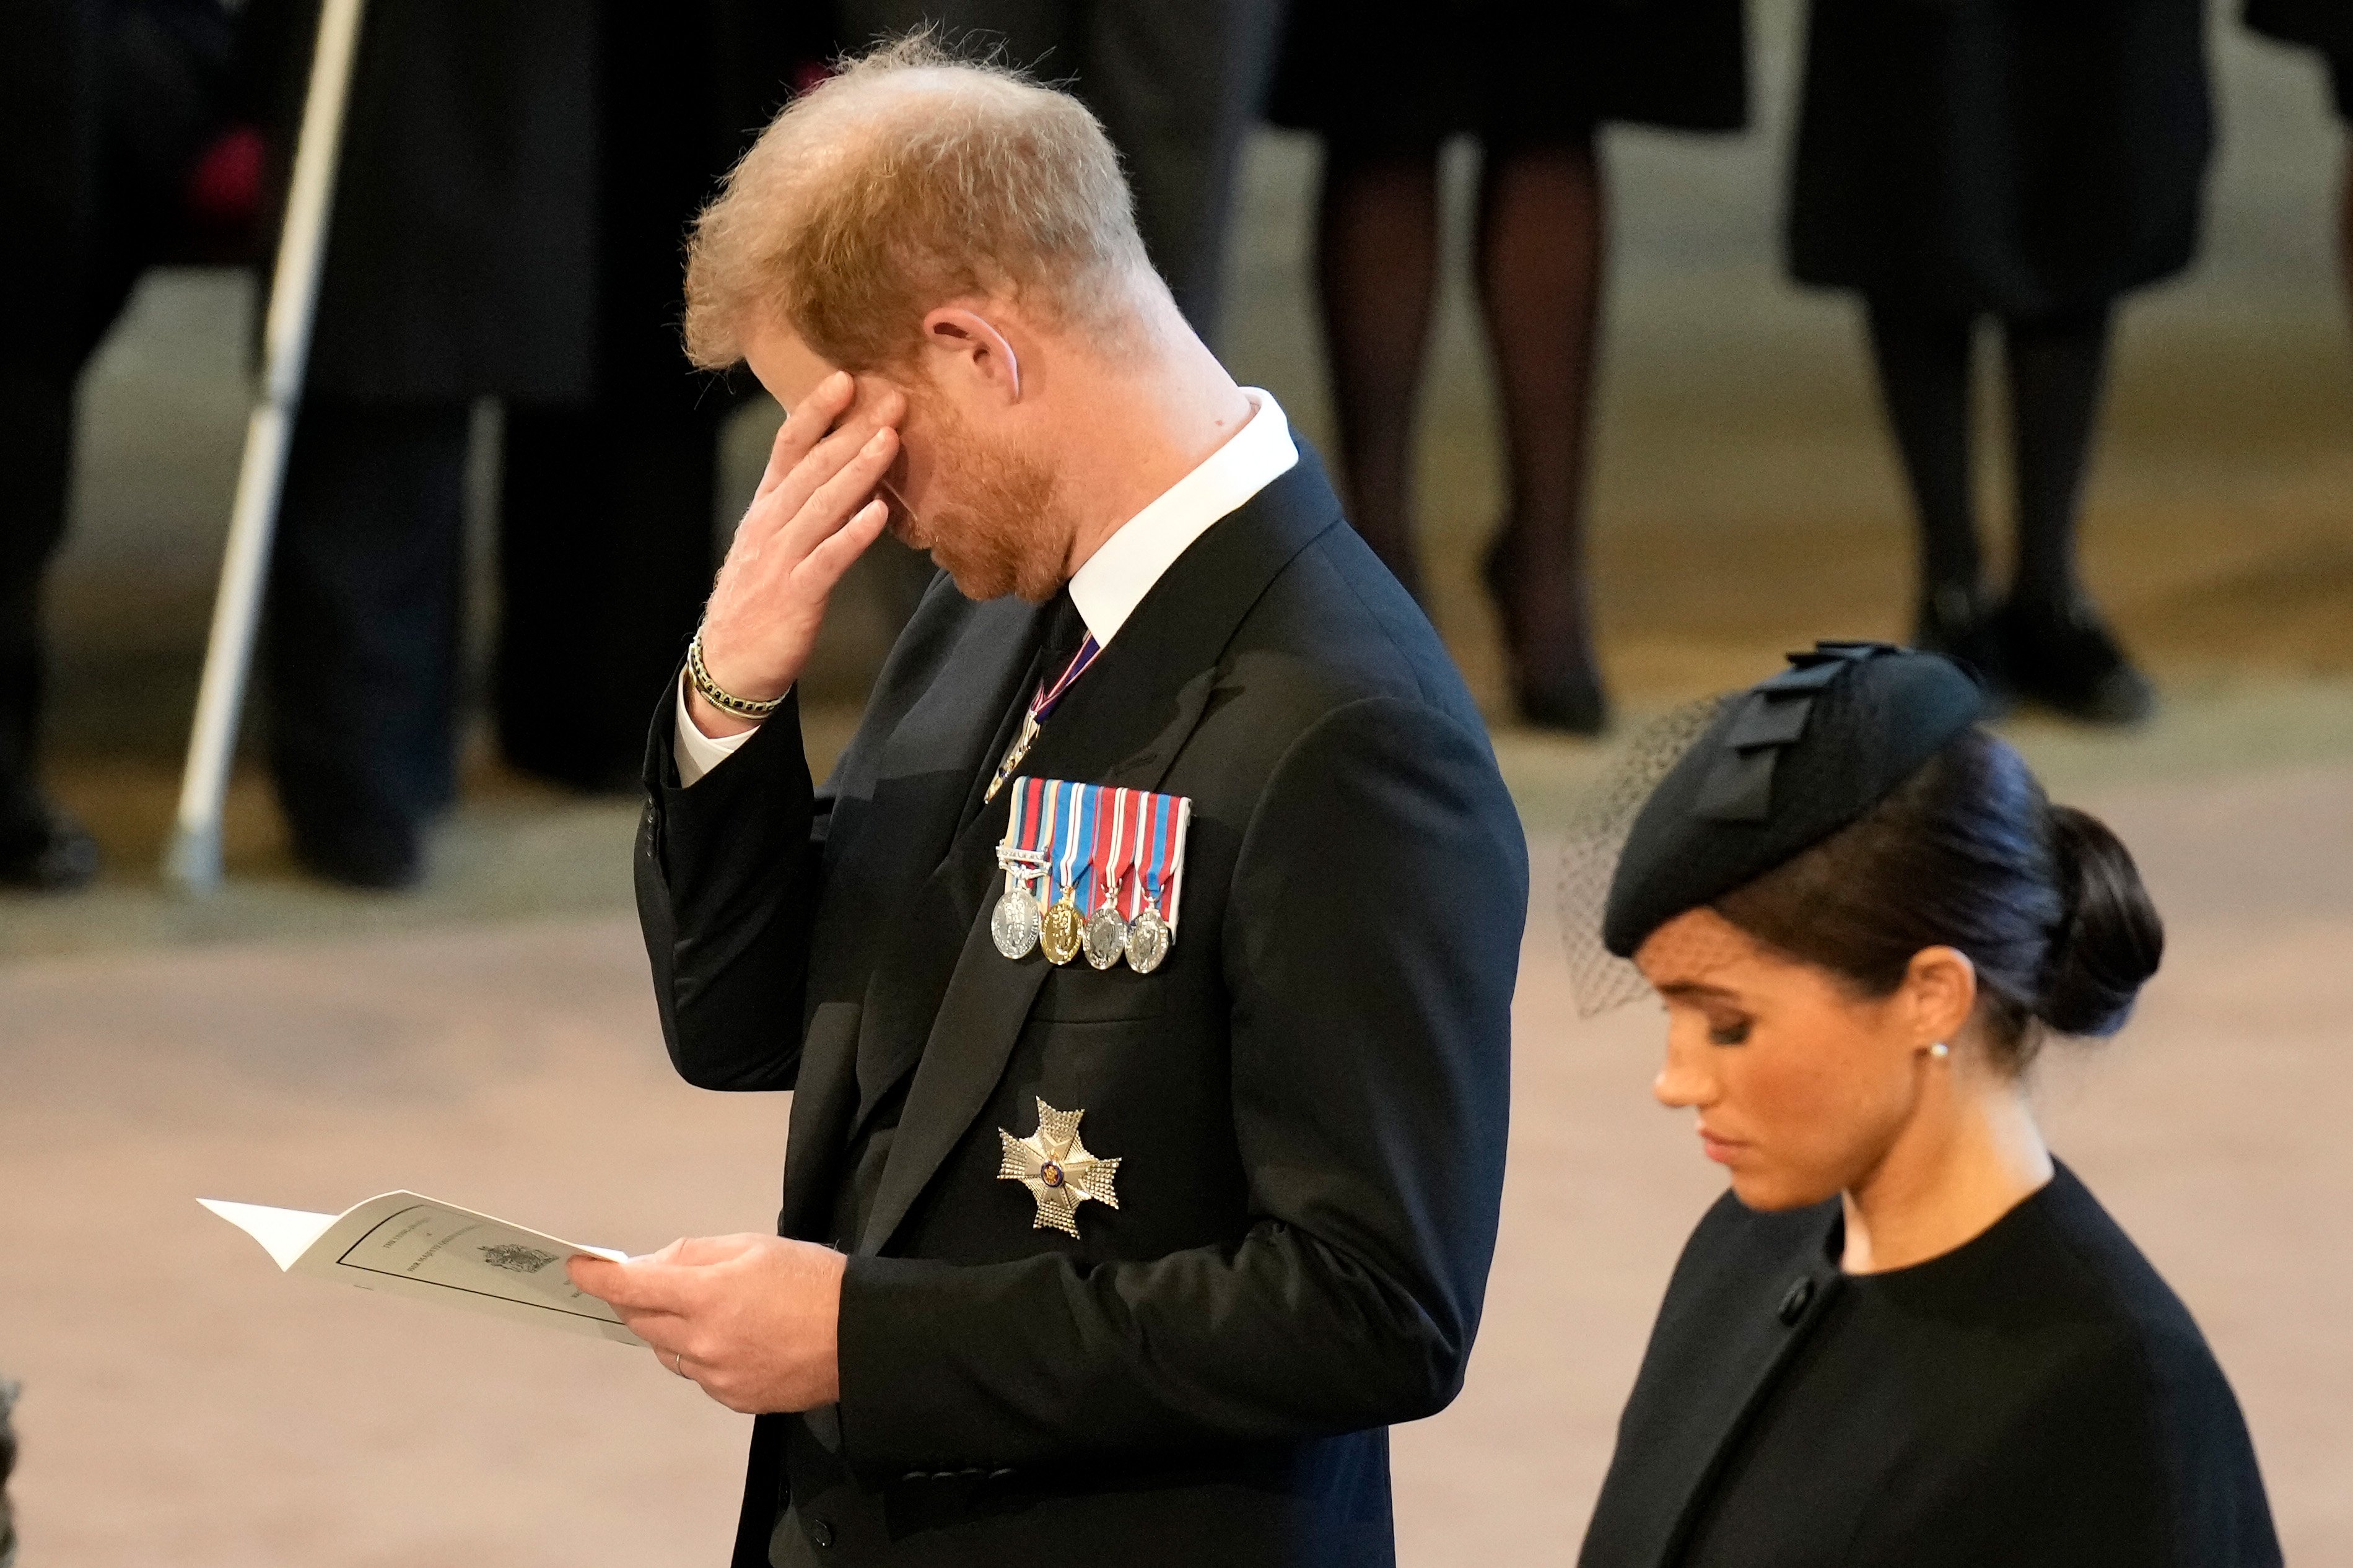 Catherine, Princess of Wales, Prince Harry, Duke of Sussex and Meghan, Duchess of Sussex pay their respects at the Palace of Westminster after Queen Elizabeth II's lying state procession on September 14, 2022 in London, England |  Source: Getty Images 